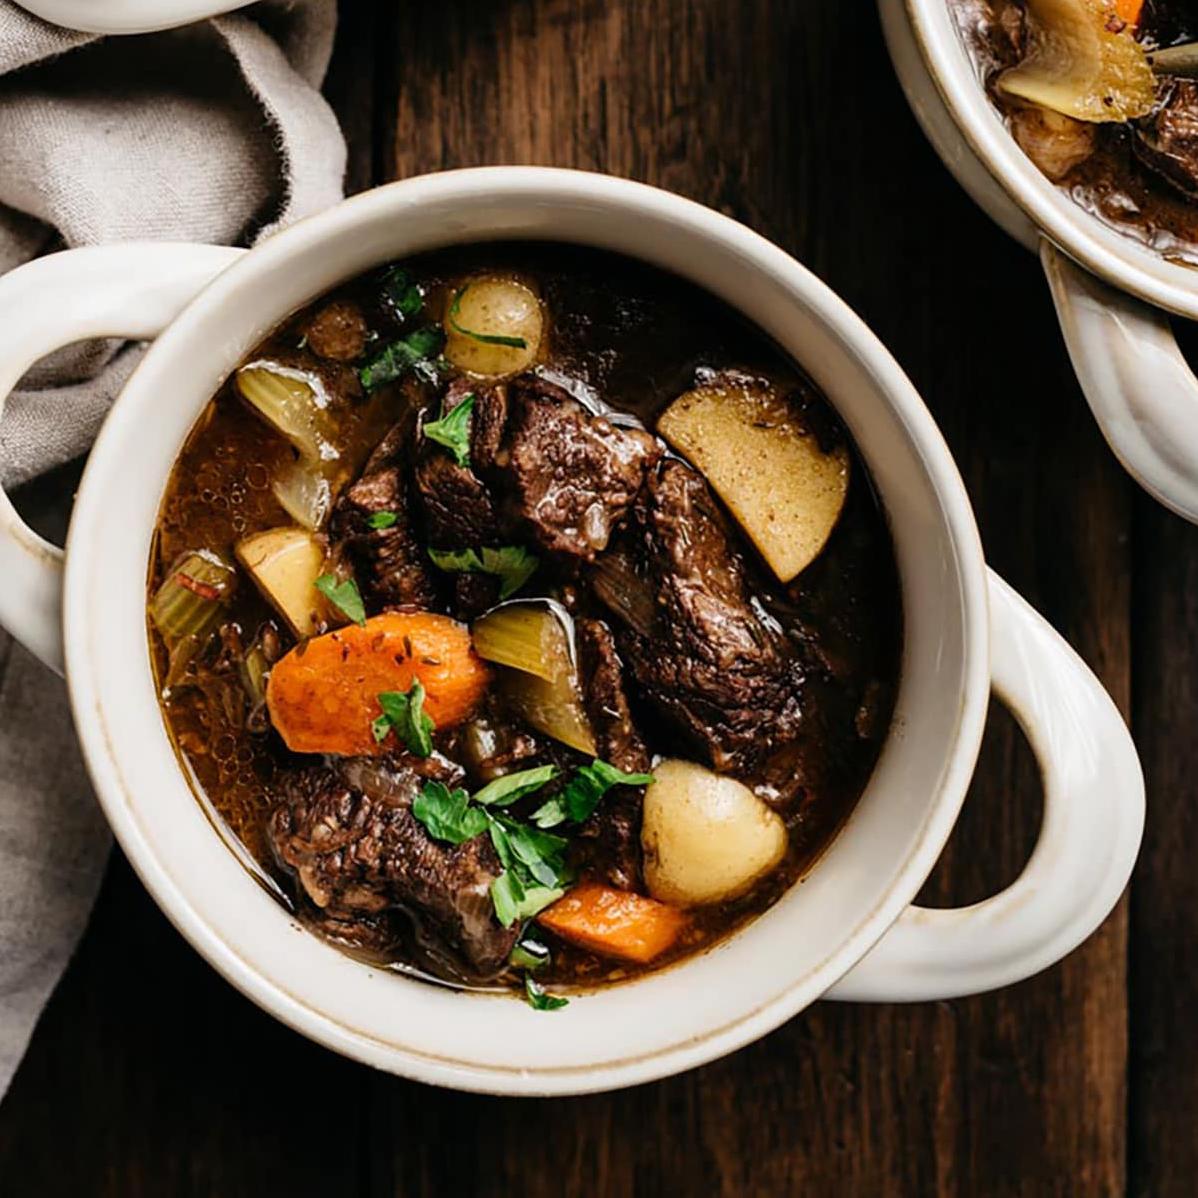  Fall in love with the rich aroma and flavors of this wine-braised beef stew.